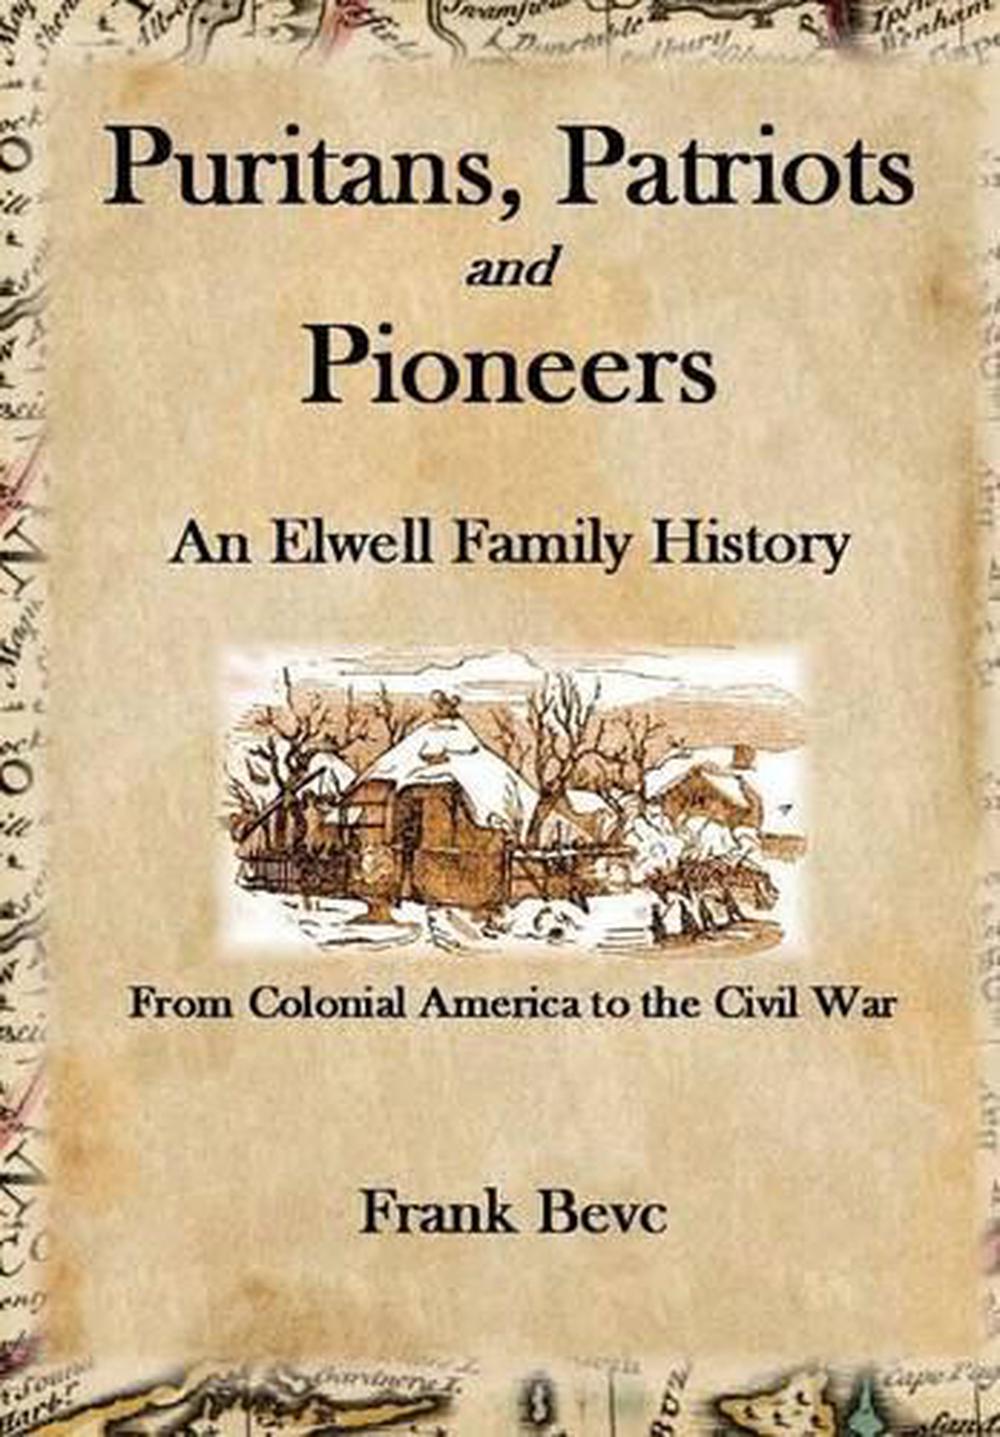 Puritans, Patriots and Pioneers an Elwell Family History by Frank Bevc (English 9781365147197